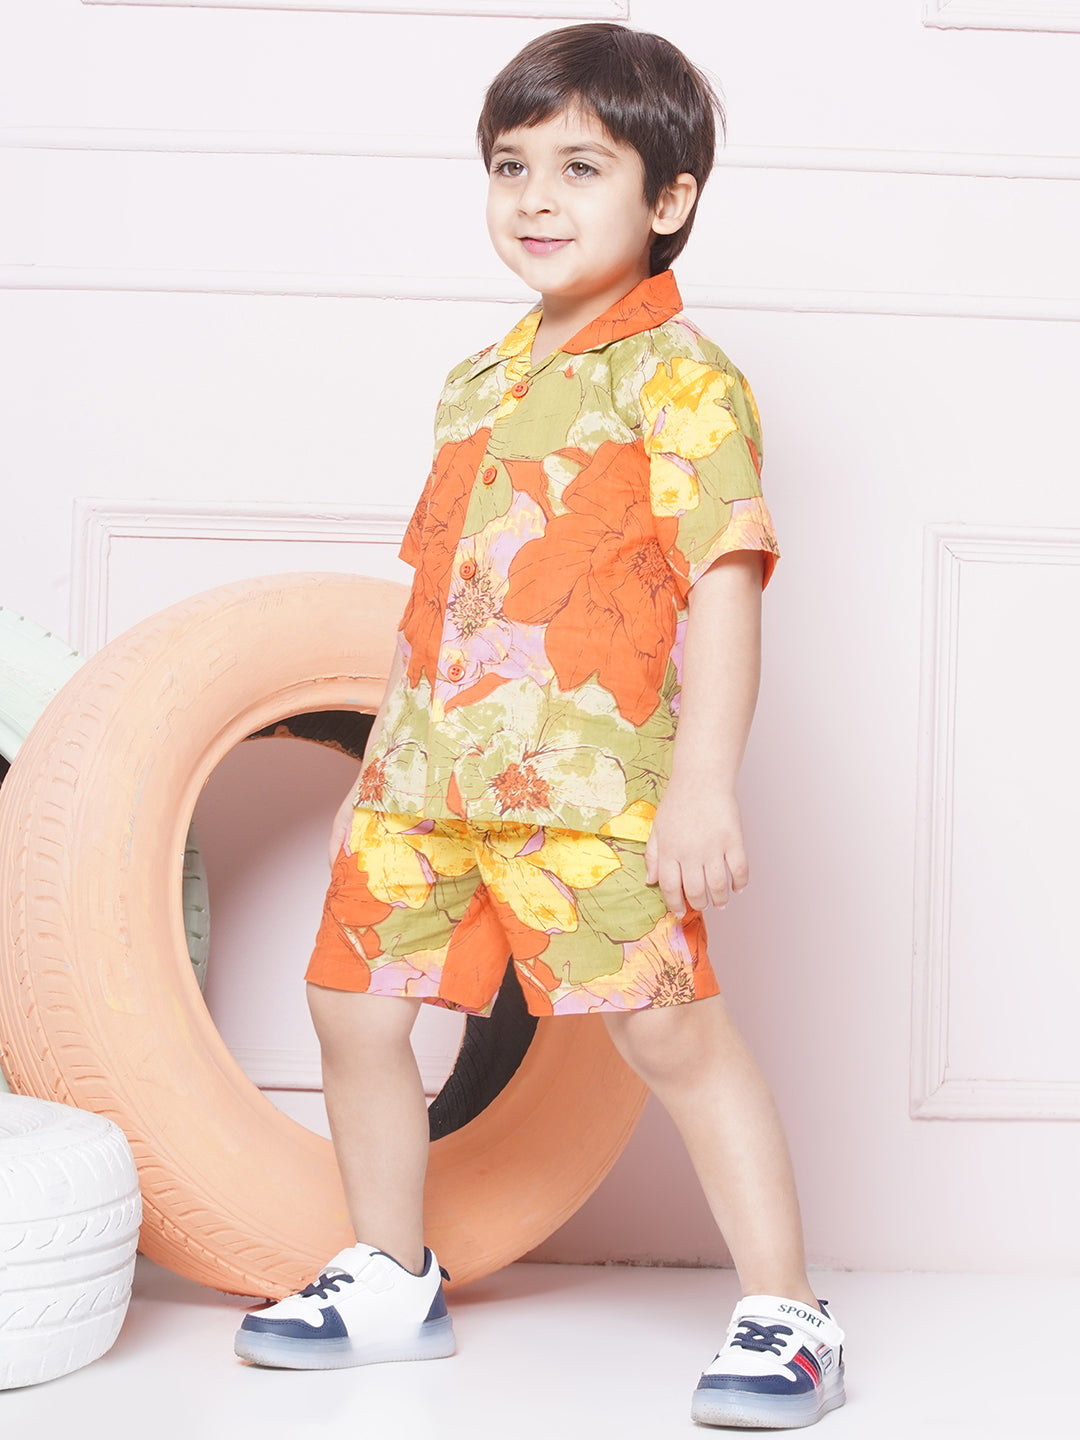 Red Cotton Shirt & shorts Half Sleeves with Collar and Floral CO-ORDS Set for Boys